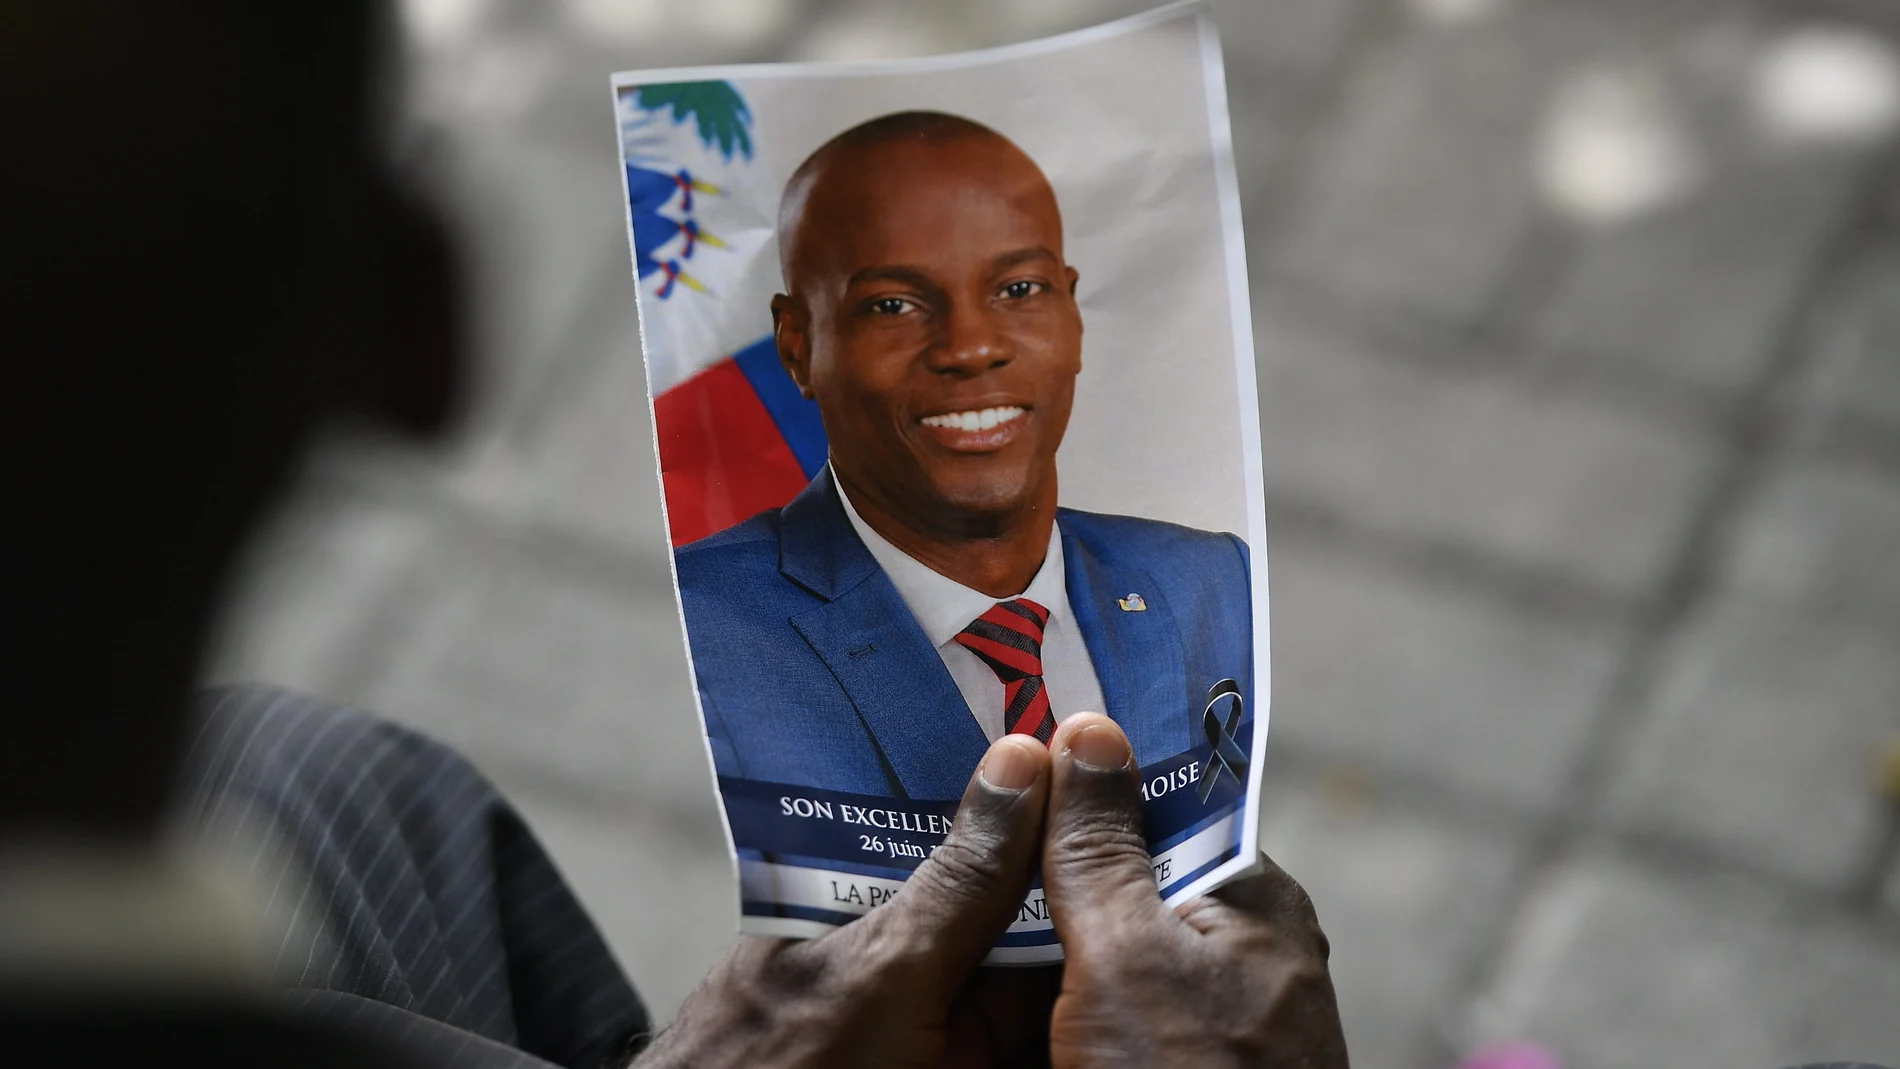 FILE - A person holds a photo of late Haitian President Jovenel Moise during his memorial ceremony at the National Pantheon Museum in Port-au-Prince, Haiti, Tuesday, July 20, 2021. Authorities in the Dominican Republic said Monday, Jan. 10, 2022, that they have arrested a key suspect in the killing of President Moise with help from the U.S. (AP Photo/Matias Delacroix, File)